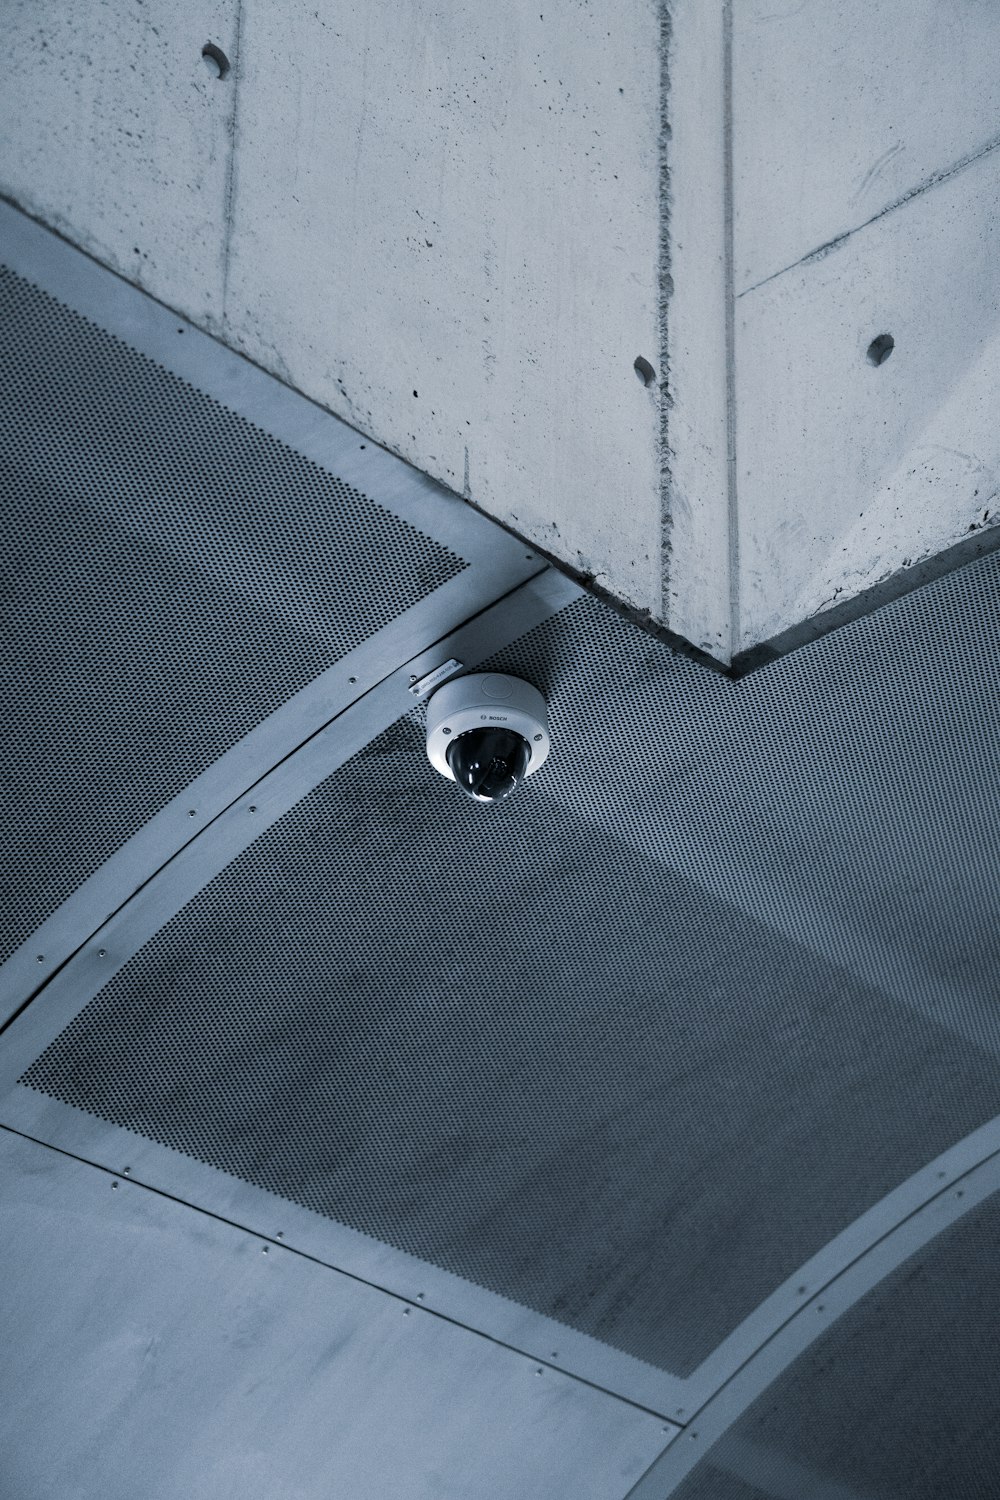 a security camera mounted to the ceiling of a building